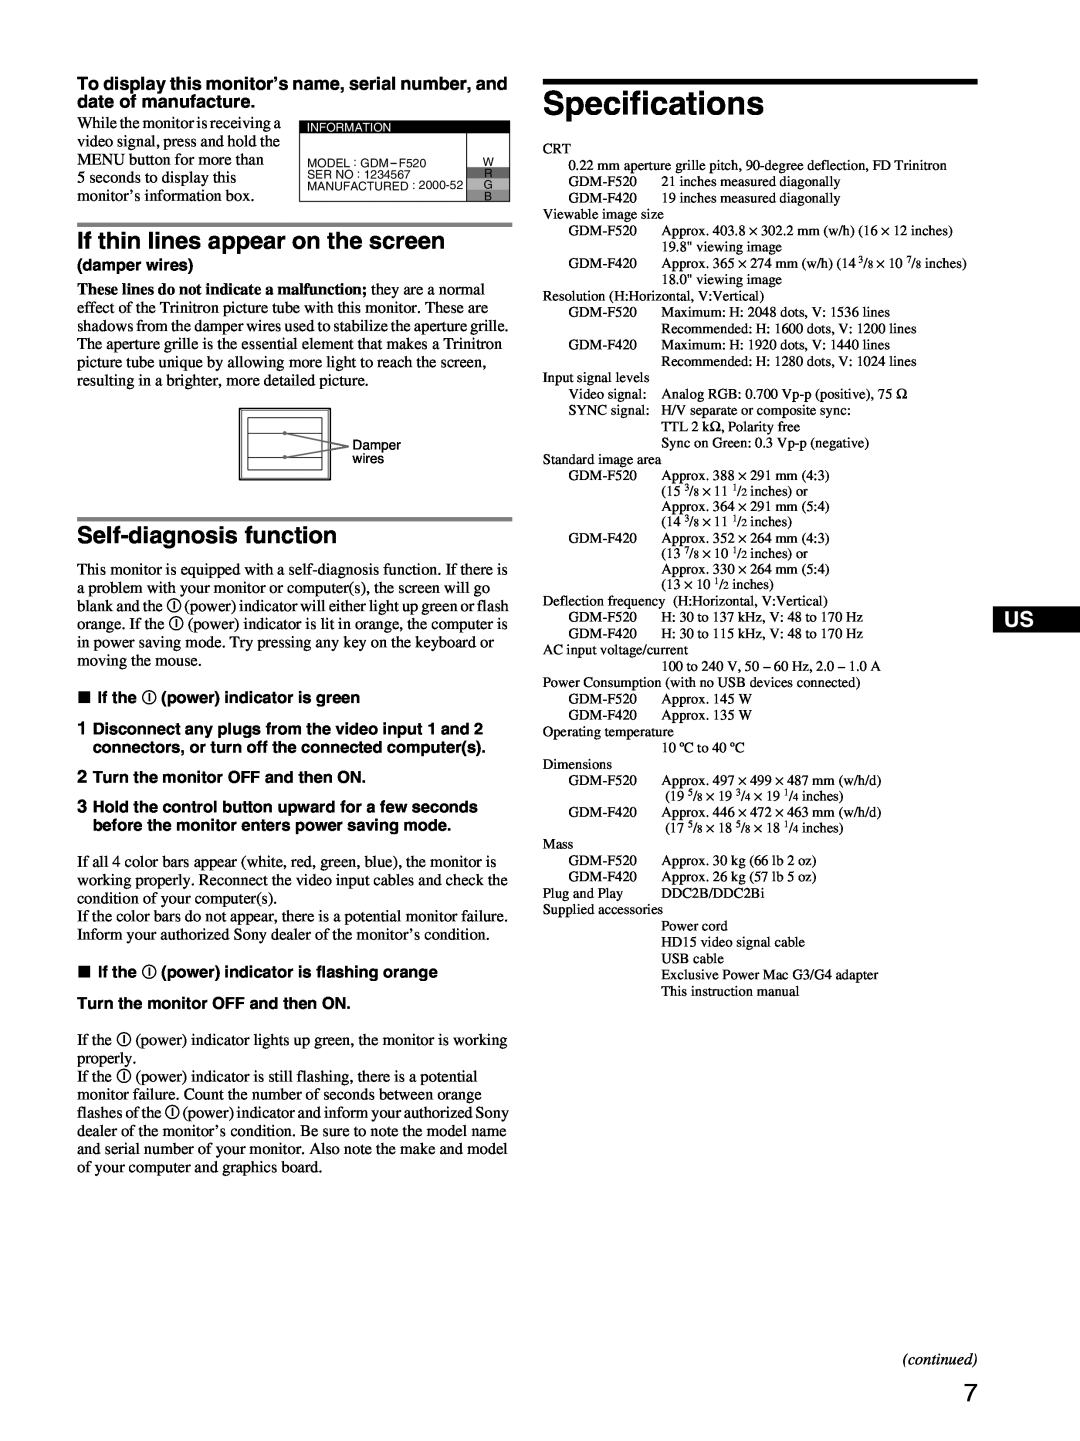 Sony GDM-F520 manual Specifications, If thin lines appear on the screen, Self-diagnosis function, damper wires, continued 